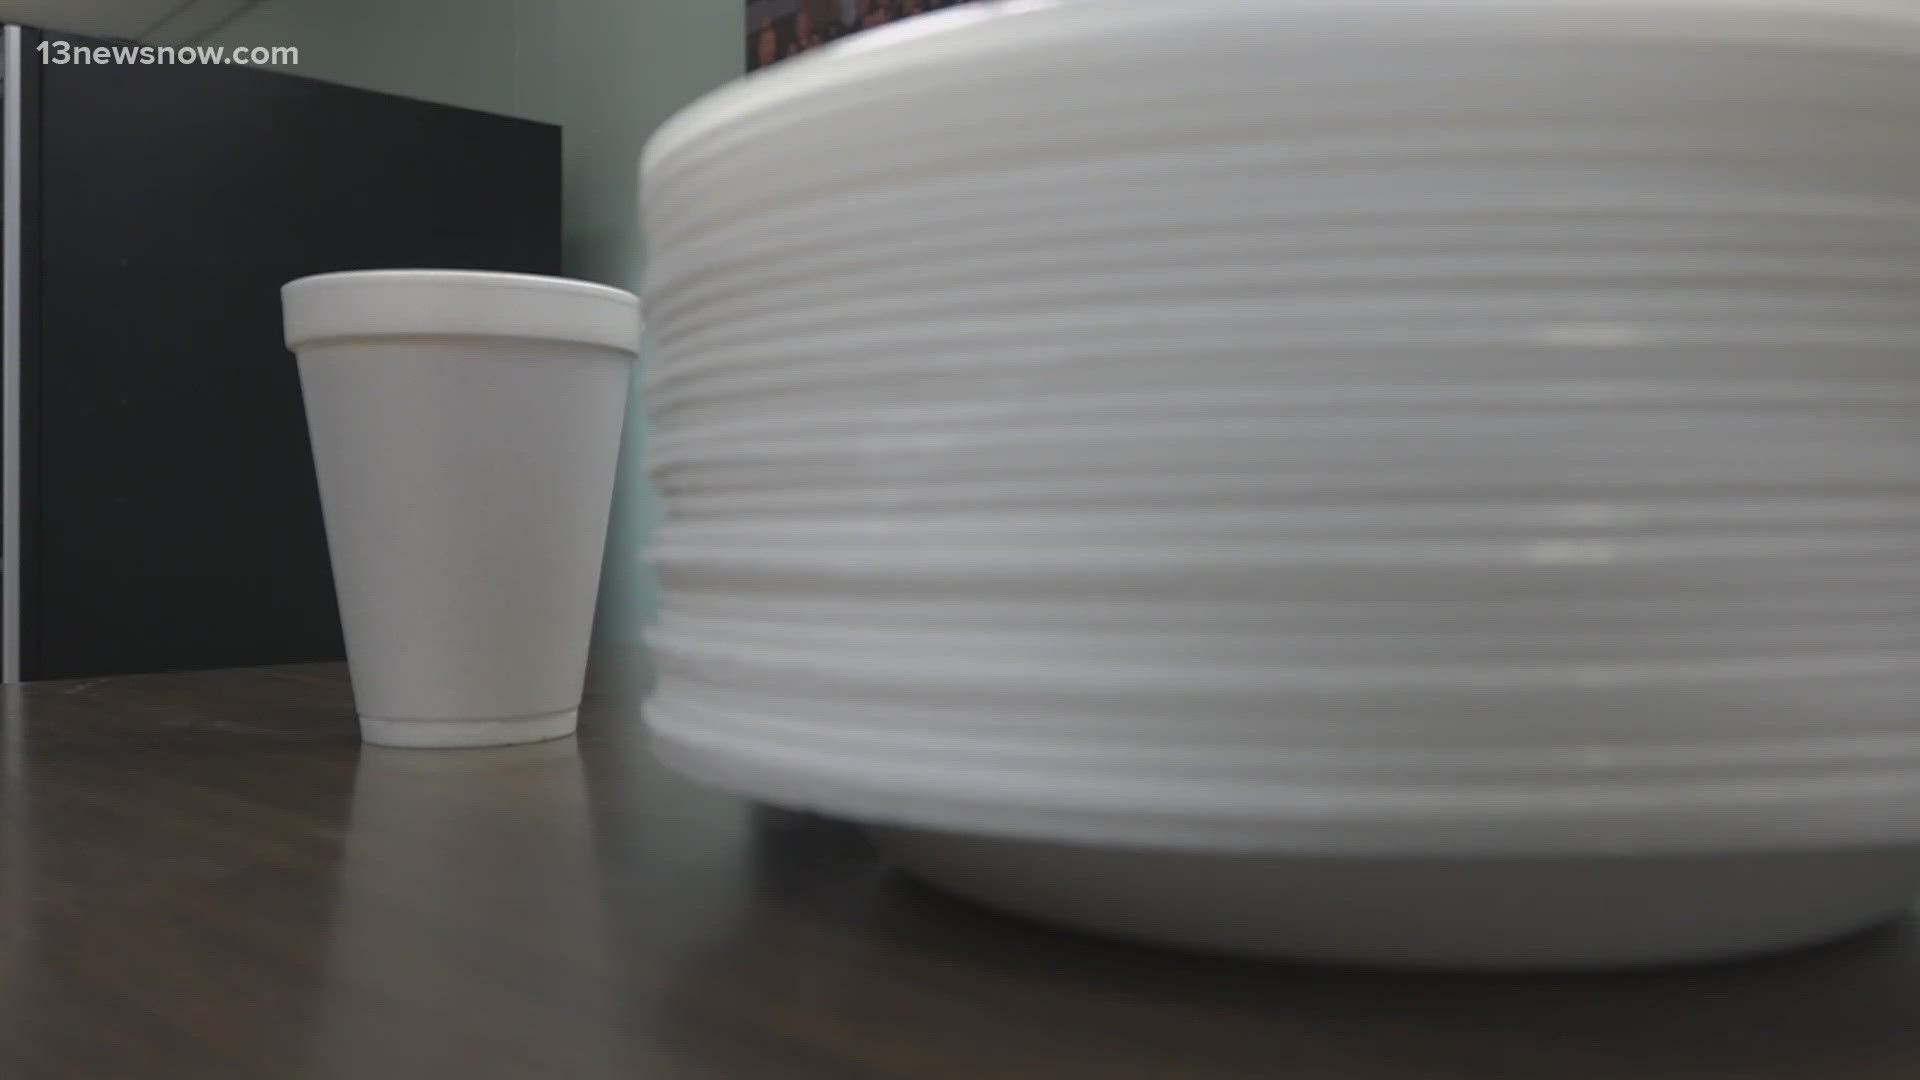 A bill to phase out Styrofoam passed in the general assembly three years ago, but the ban is not in effect yet.